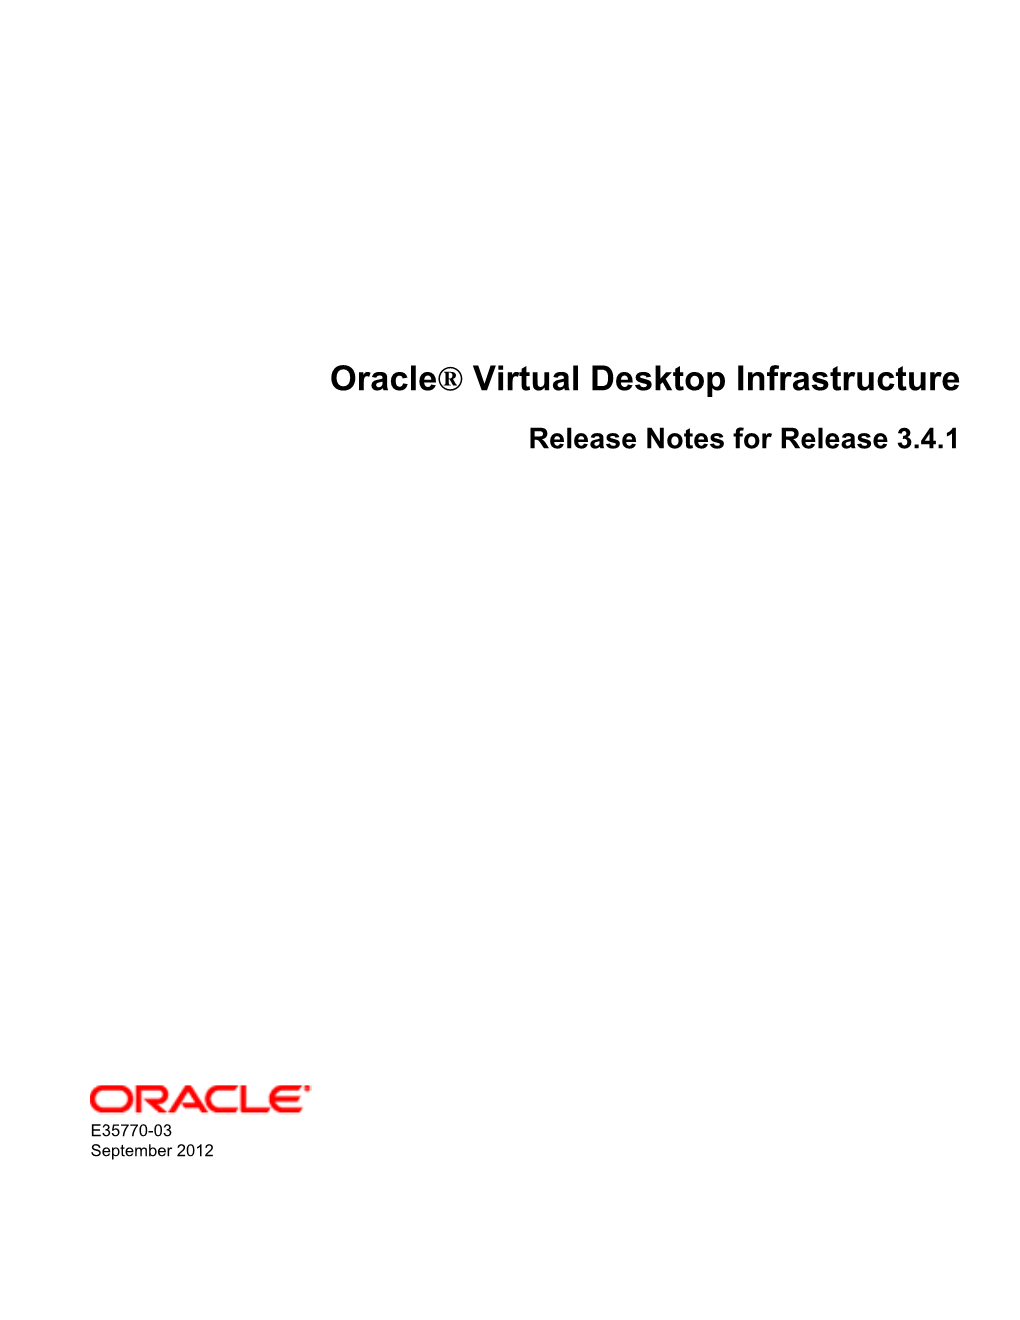 Oracle® Virtual Desktop Infrastructure Release Notes for Release 3.4.1